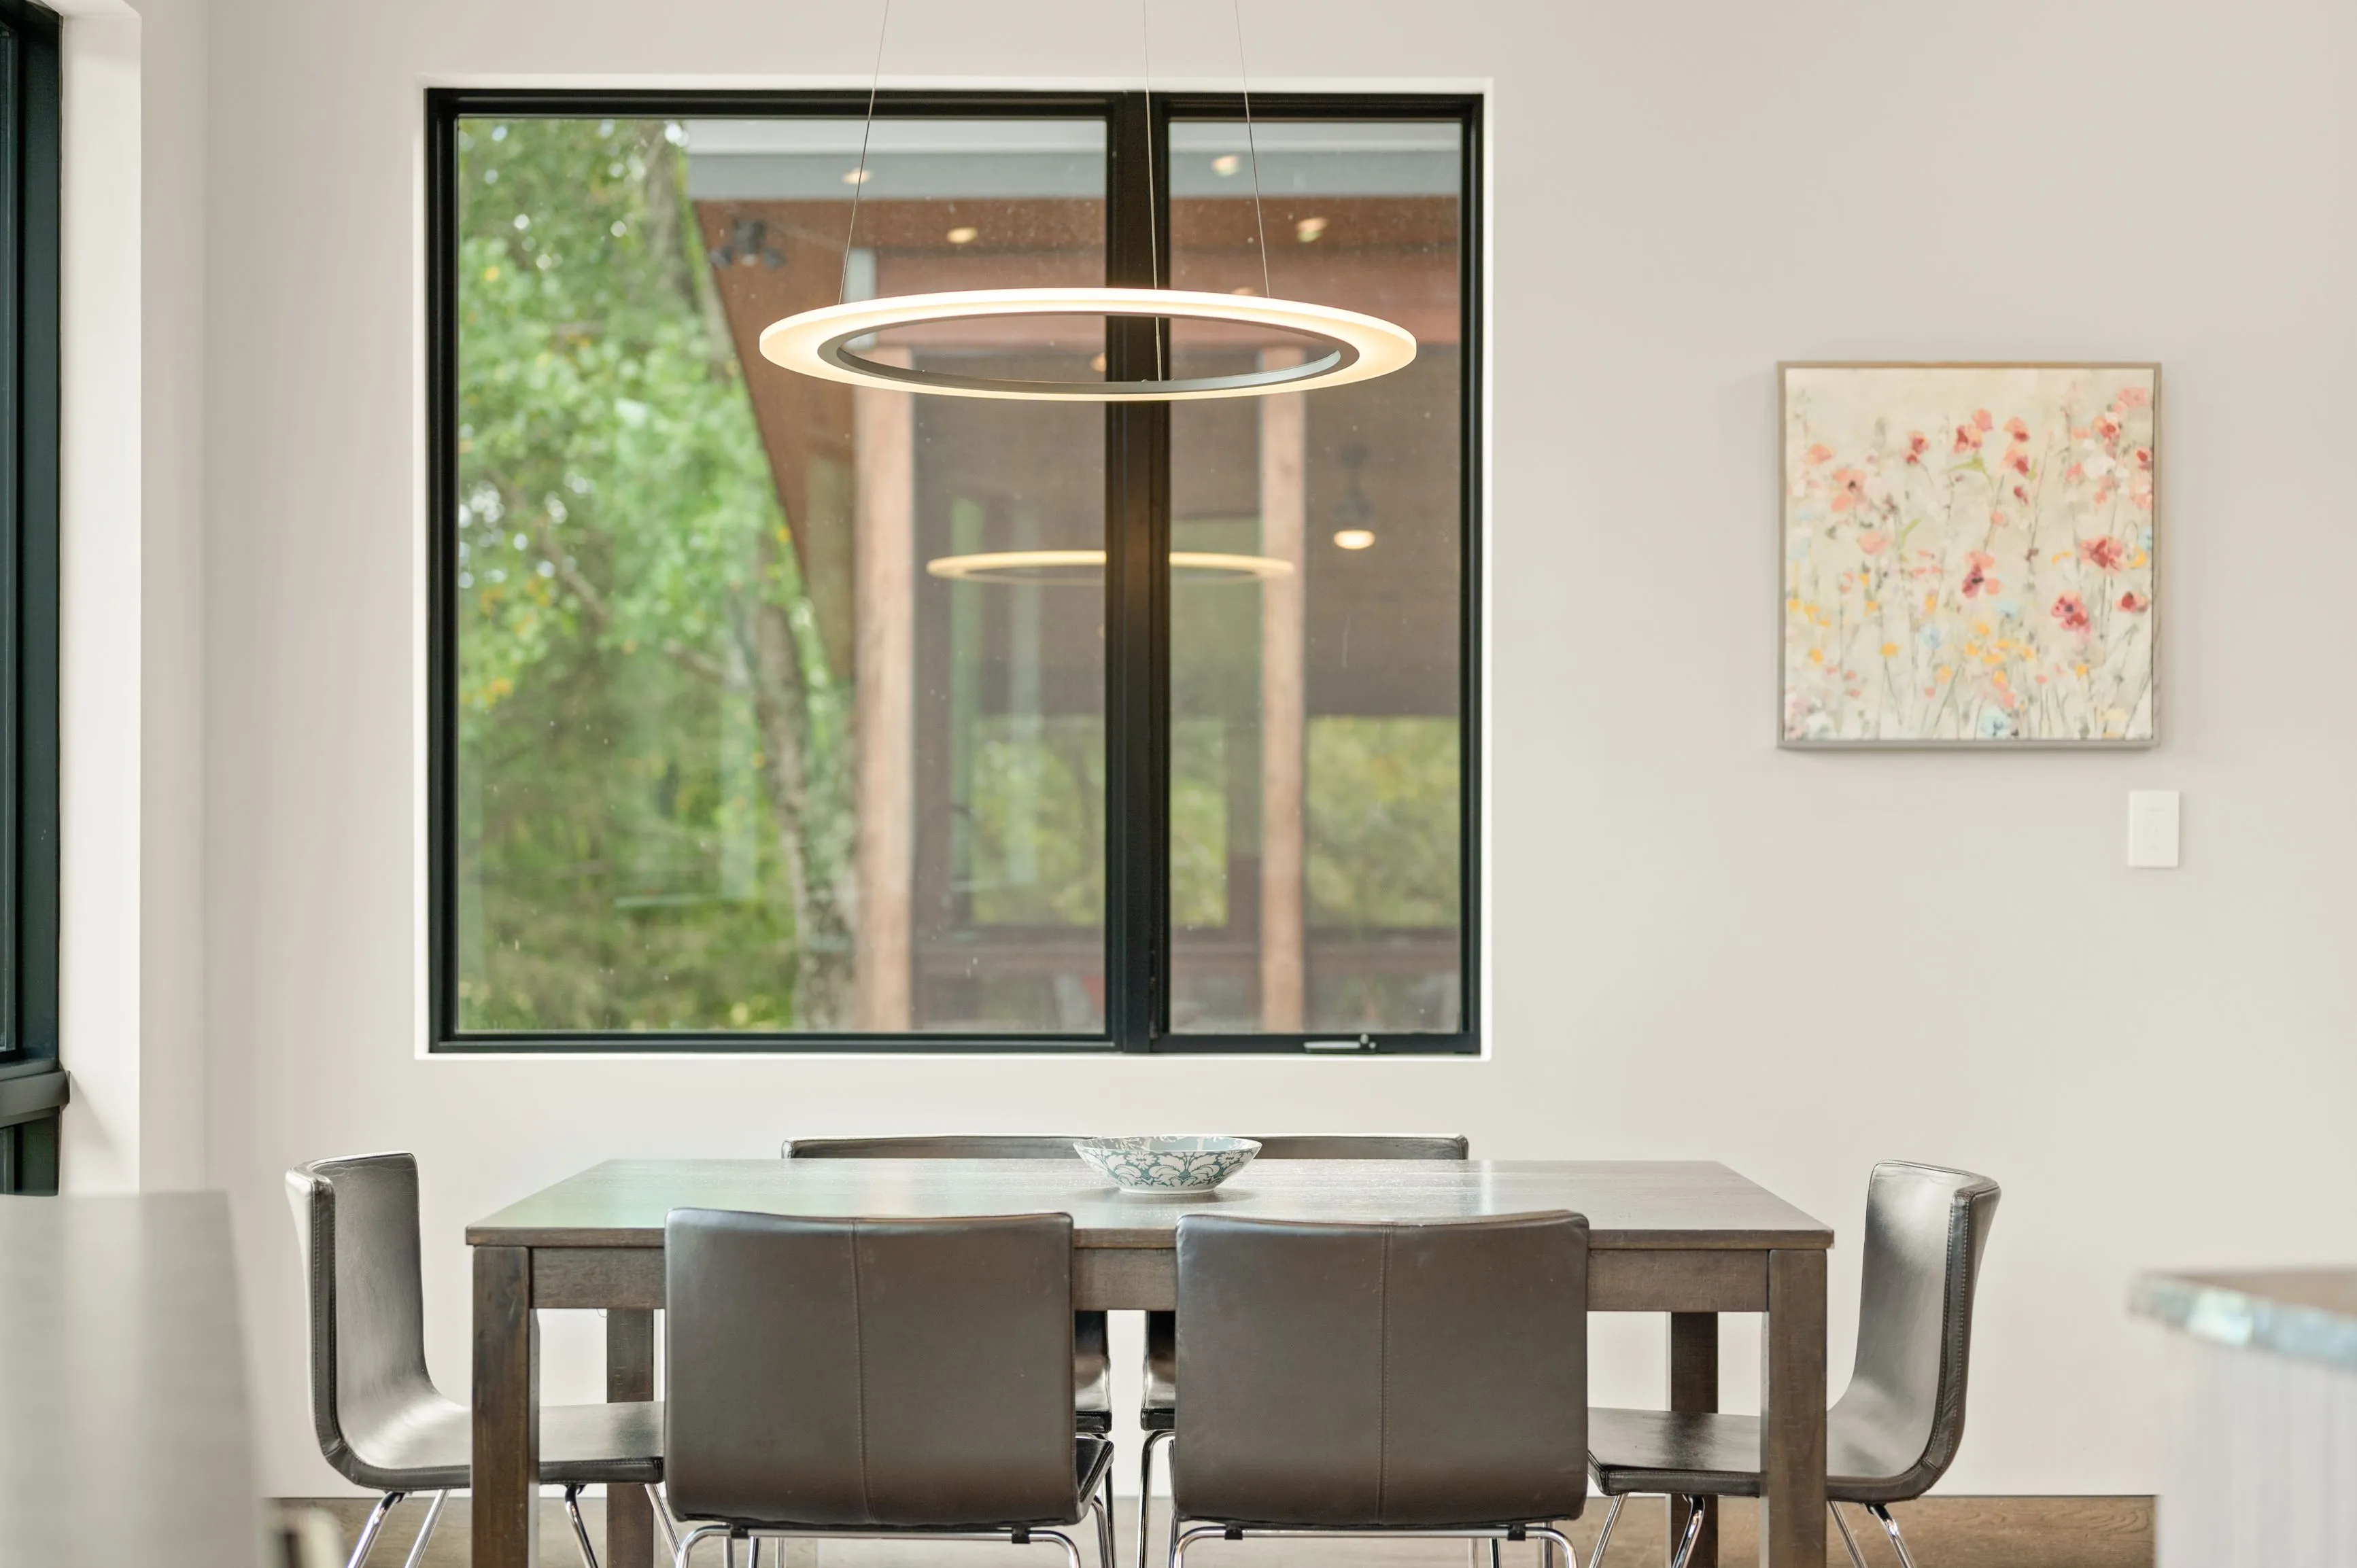 Modern dining room with a wooden table, leather chairs, hanging circular lights, and a large window overlooking trees.